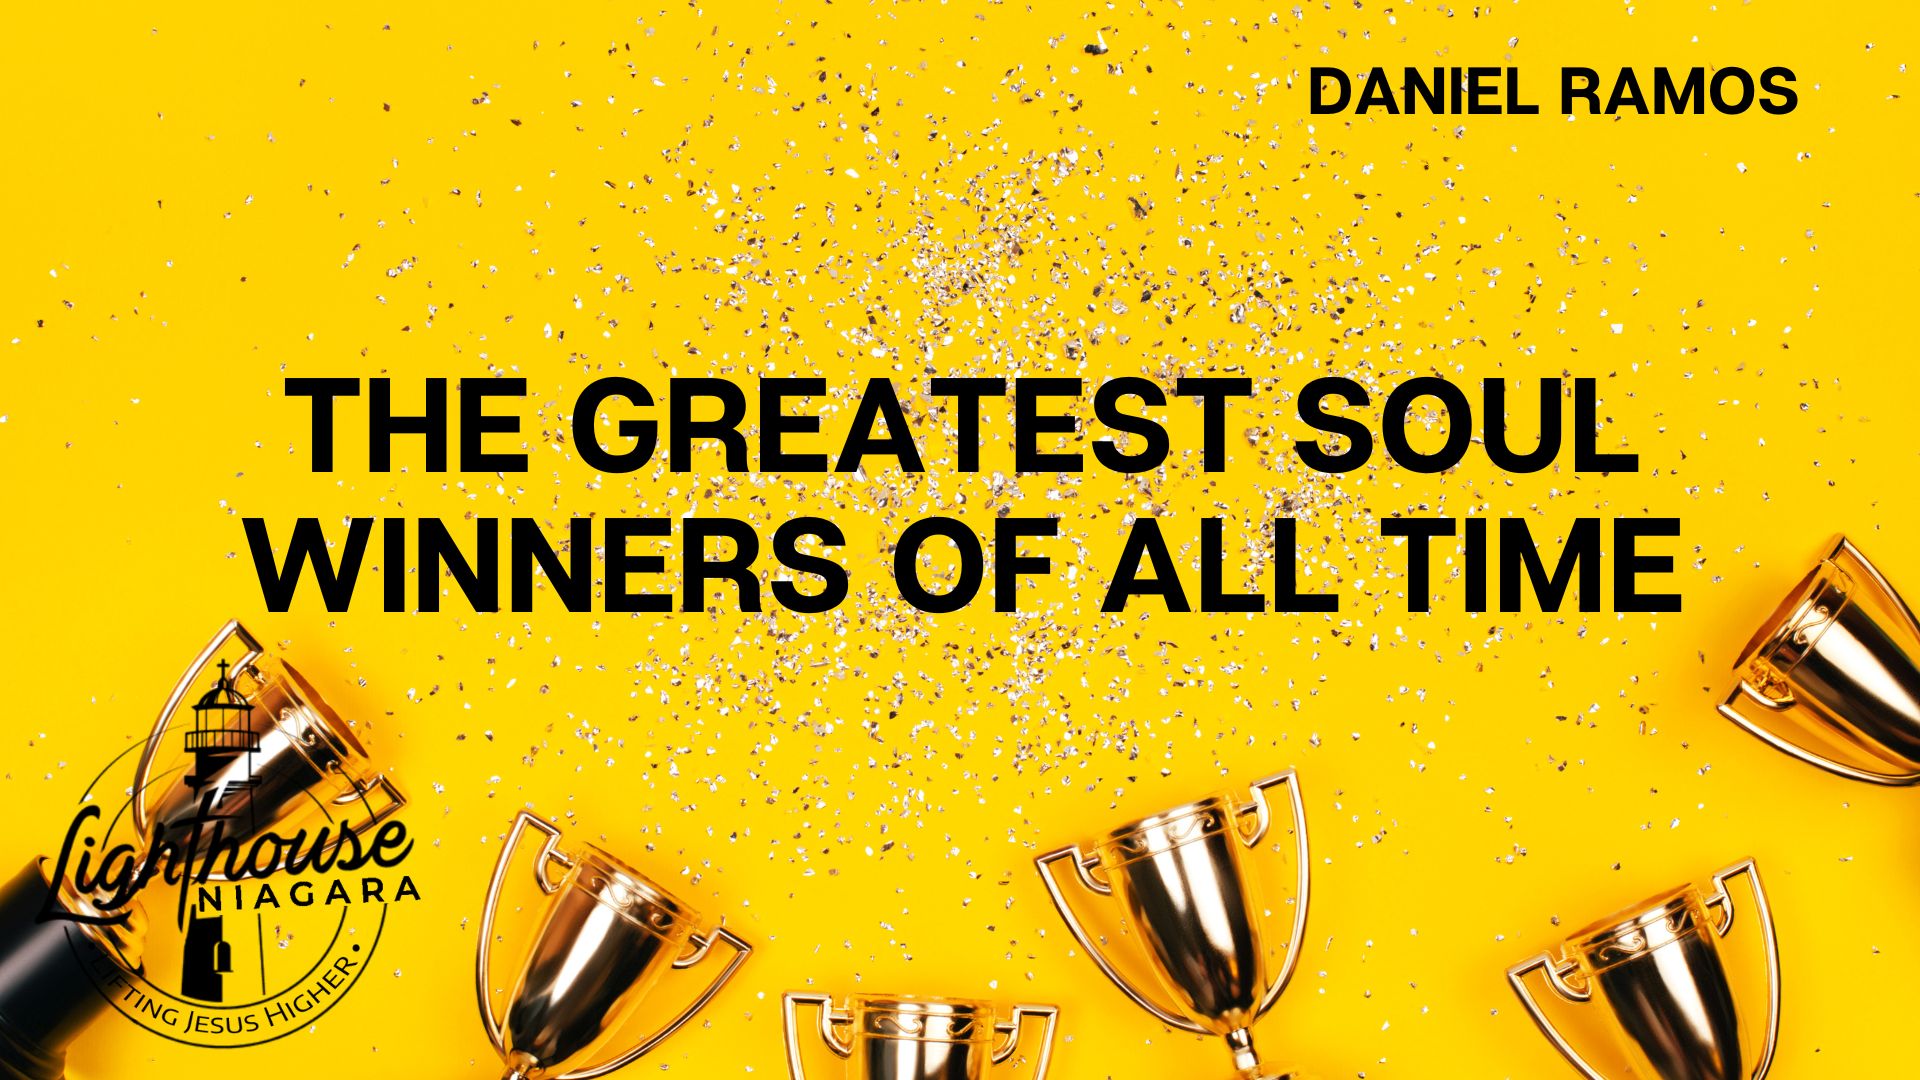 The Greatest Soul Winners Of All Time - Daniel Ramos